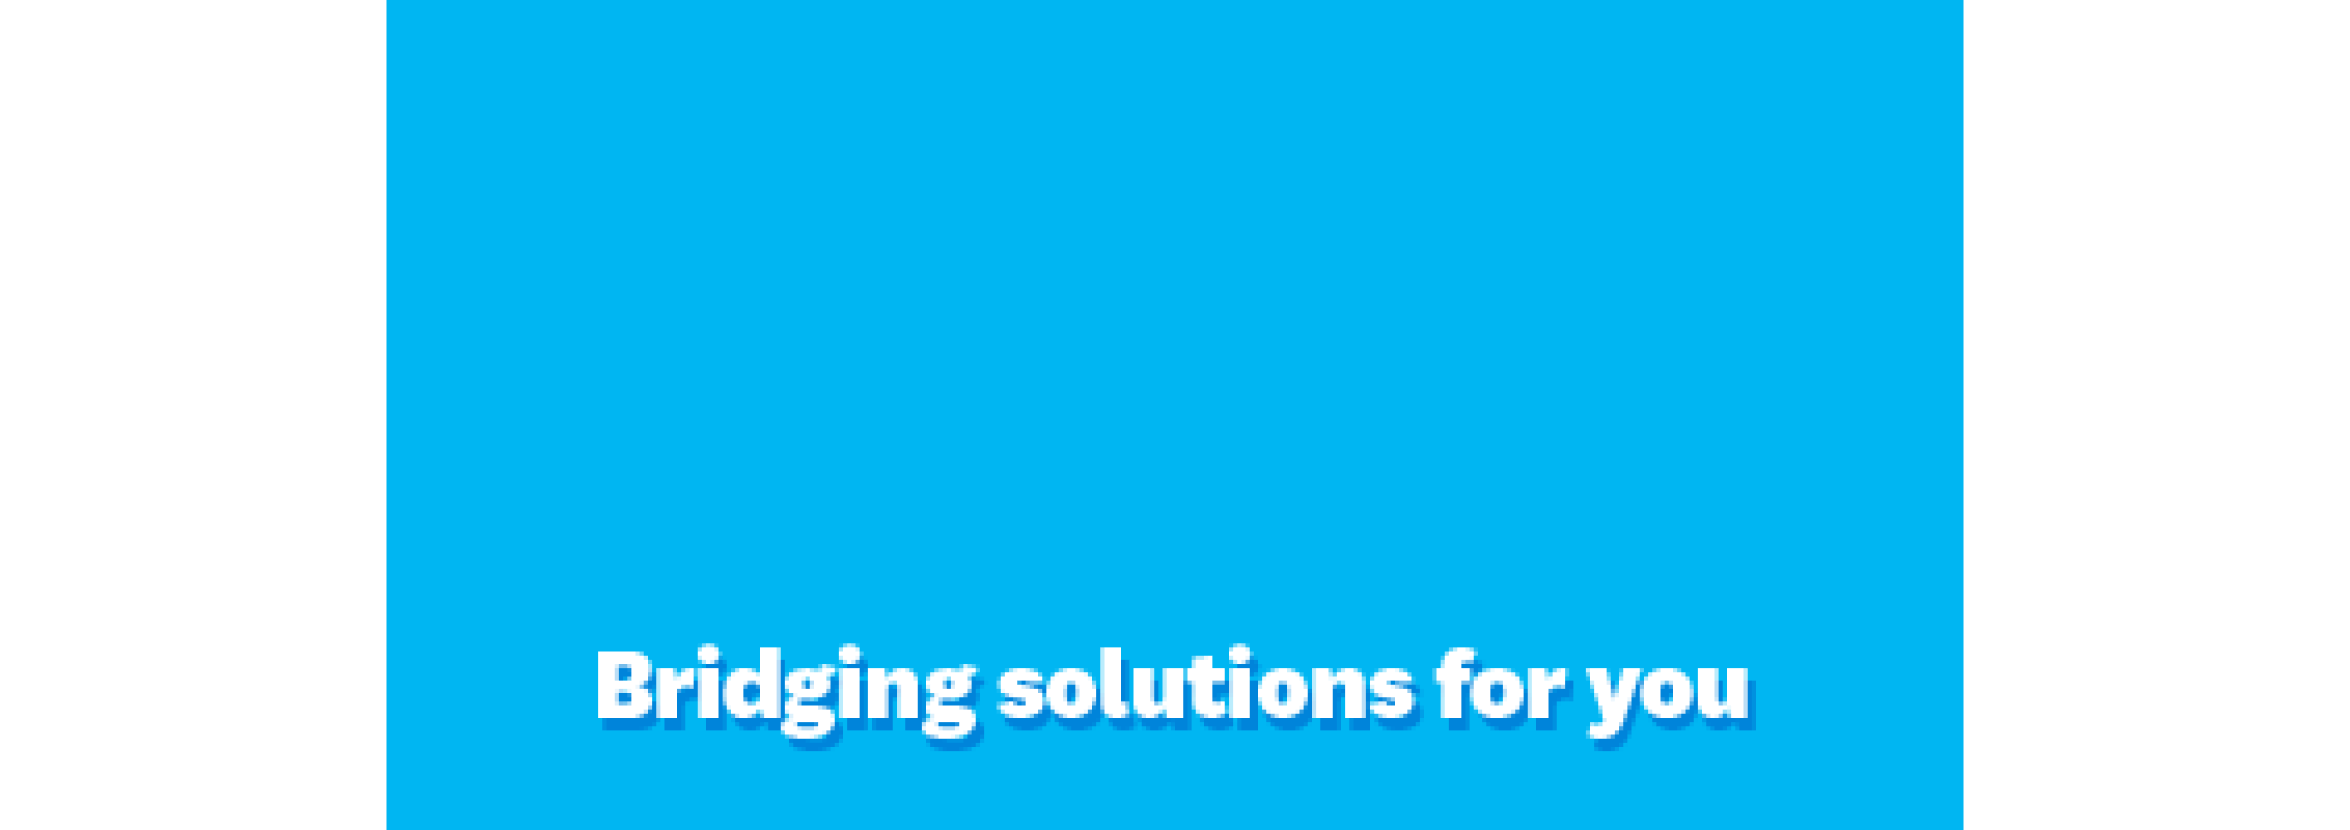 Bridging solutions for you